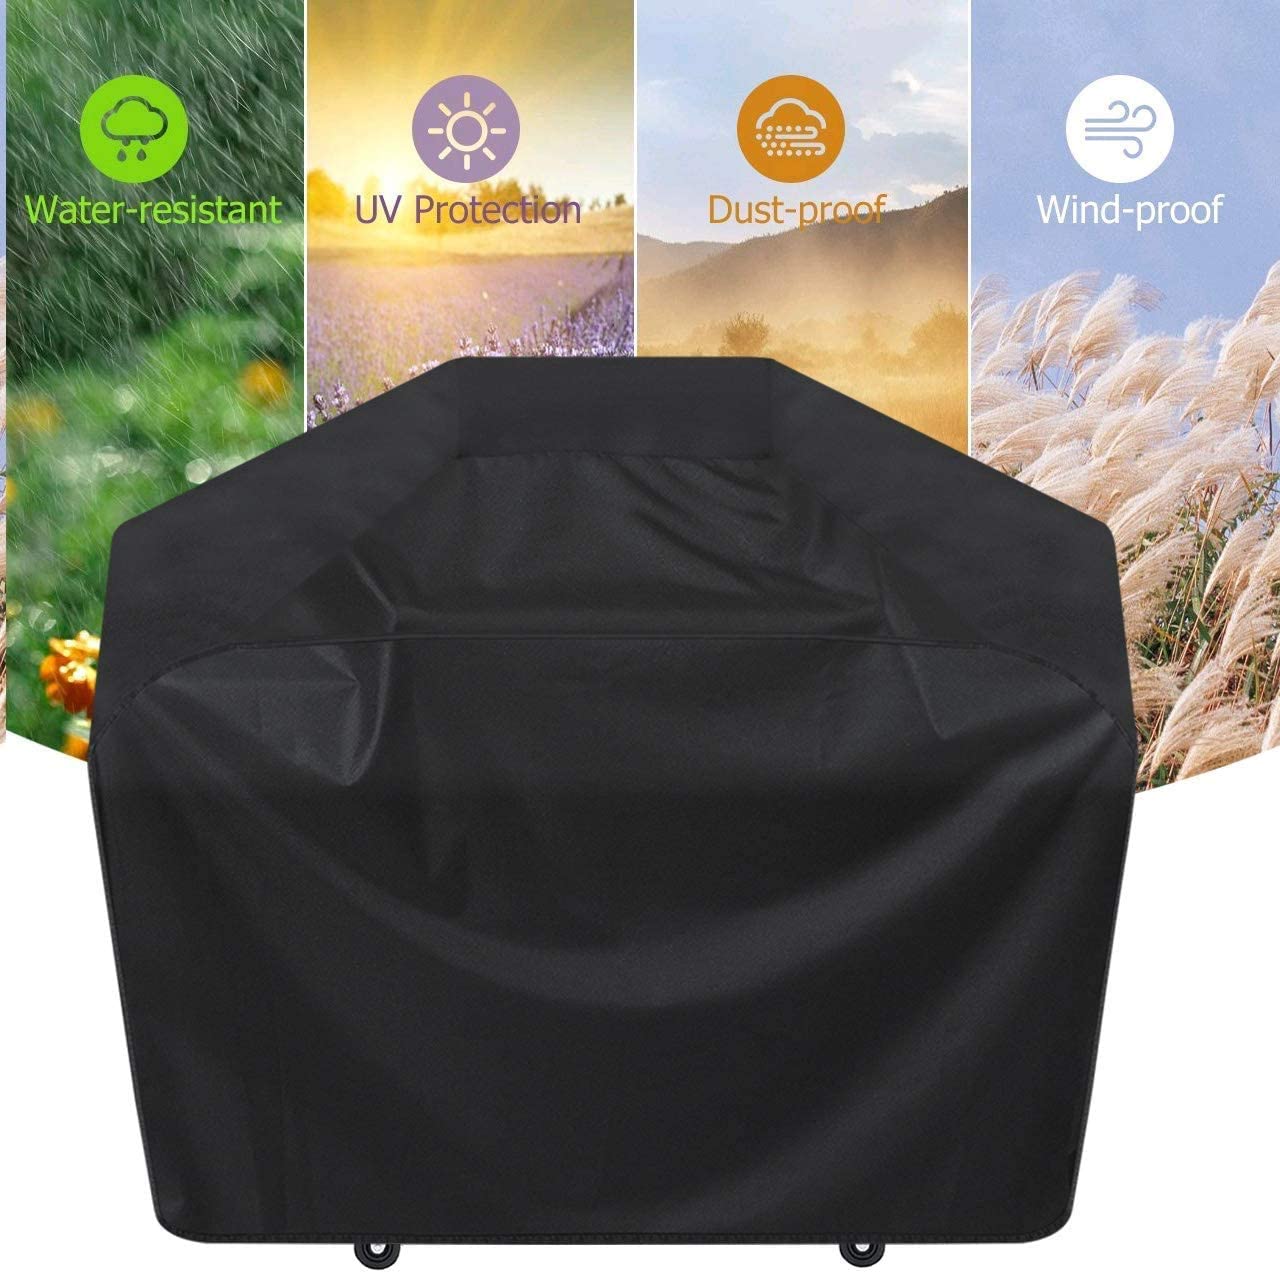 BBQ Grill Cover, 58-inch Waterproof Heavy-Duty Premium BBQ Grill Cover Gas Barbeque Grill Cover -Large((L:58" W: 24" H:46") Black - image 3 of 8